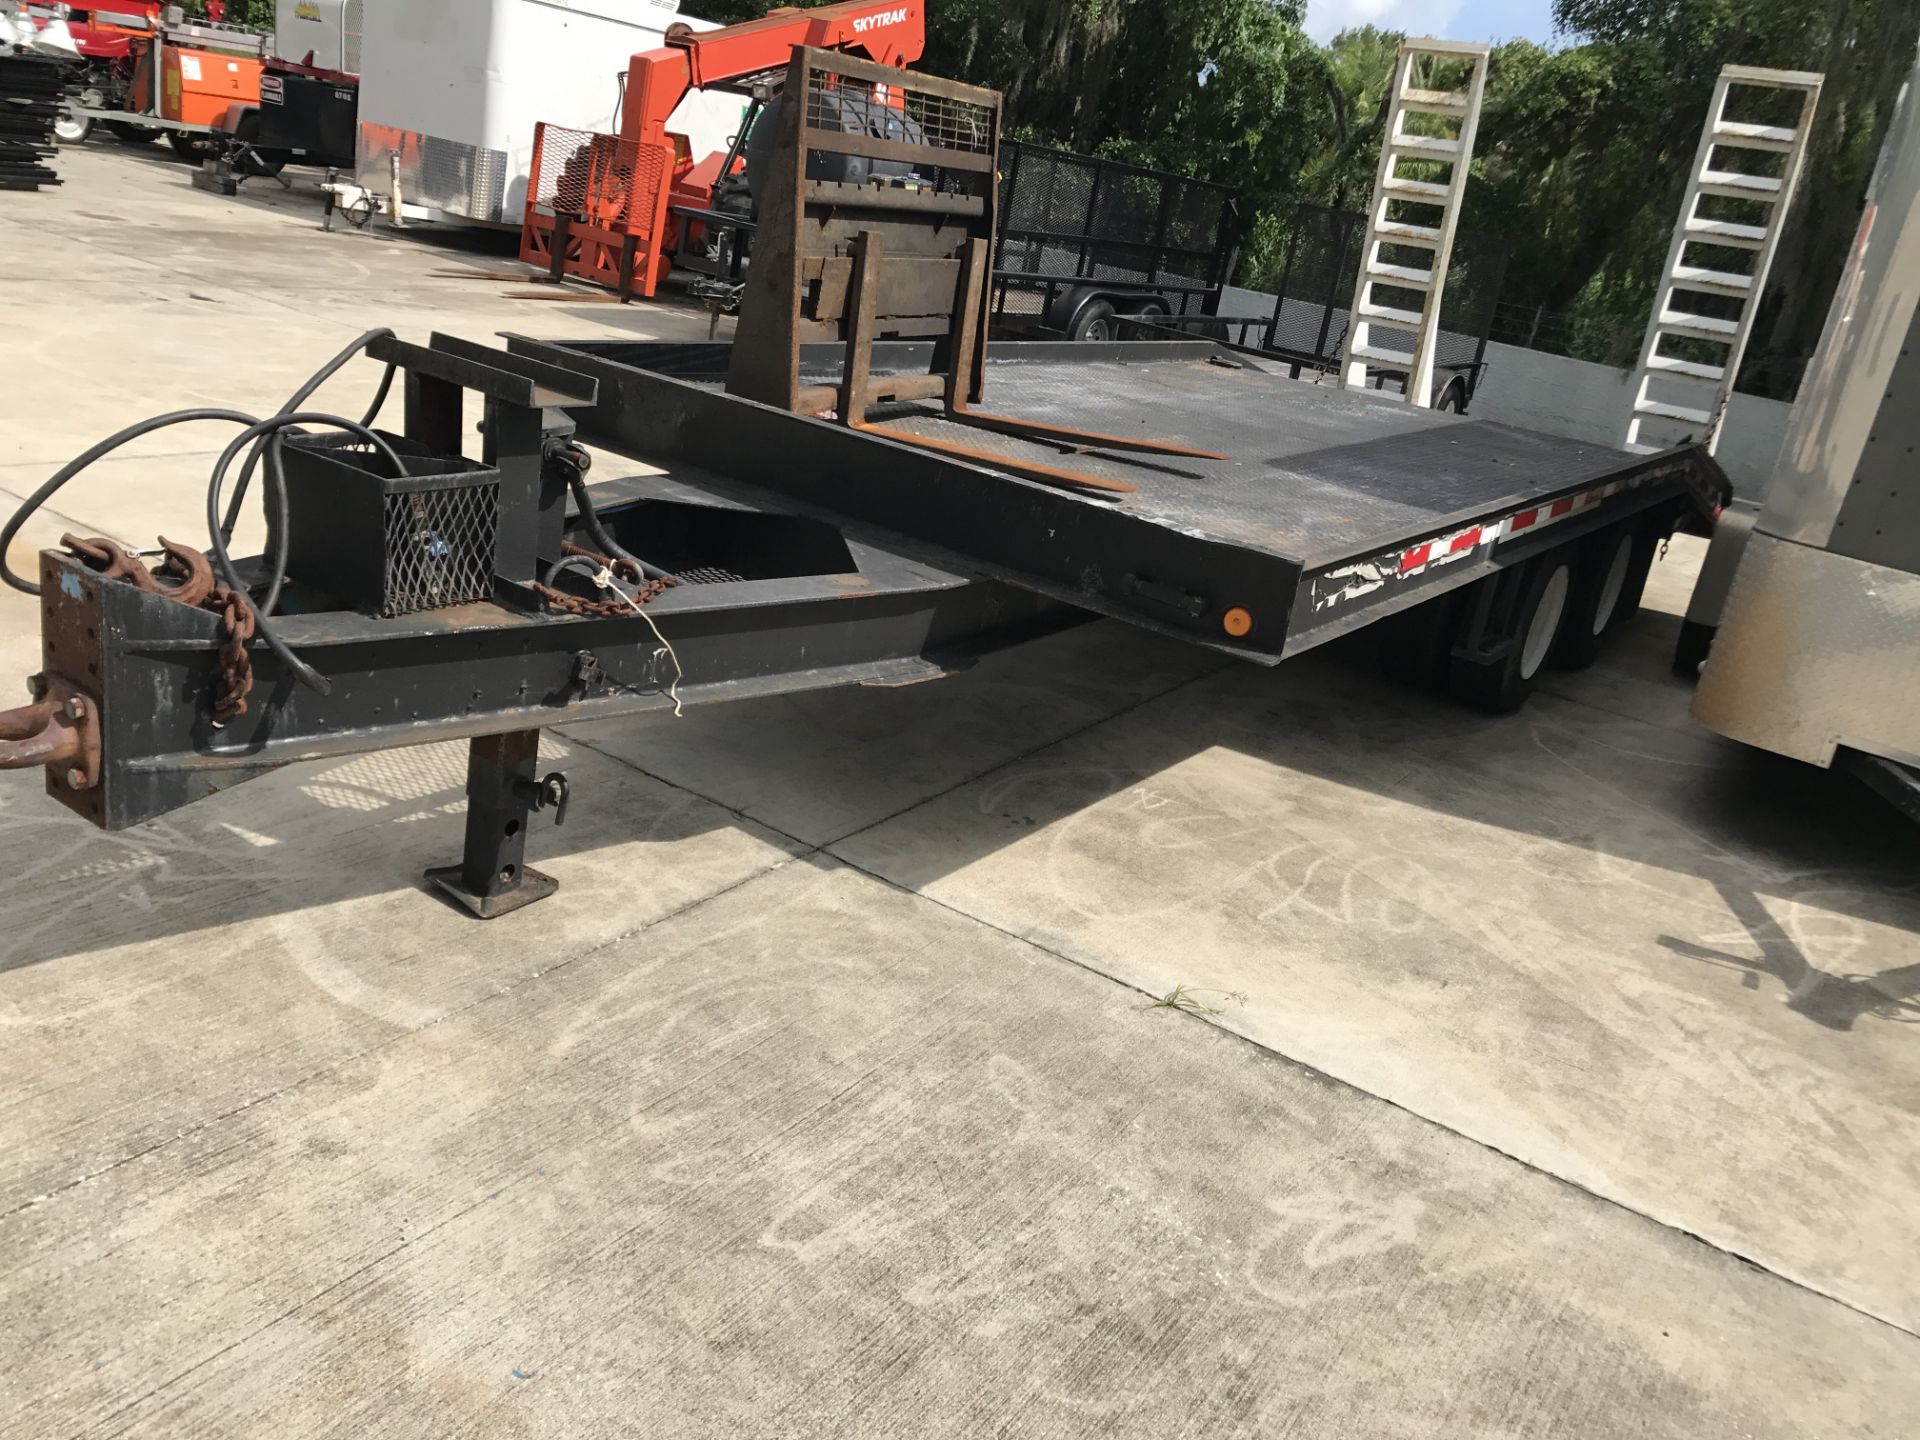 20' EQUIPMENT TRAILER W/ 5' FOLD DOWN RAMPS, 20' STEEL DECK, AIR BRAKES - Image 4 of 4